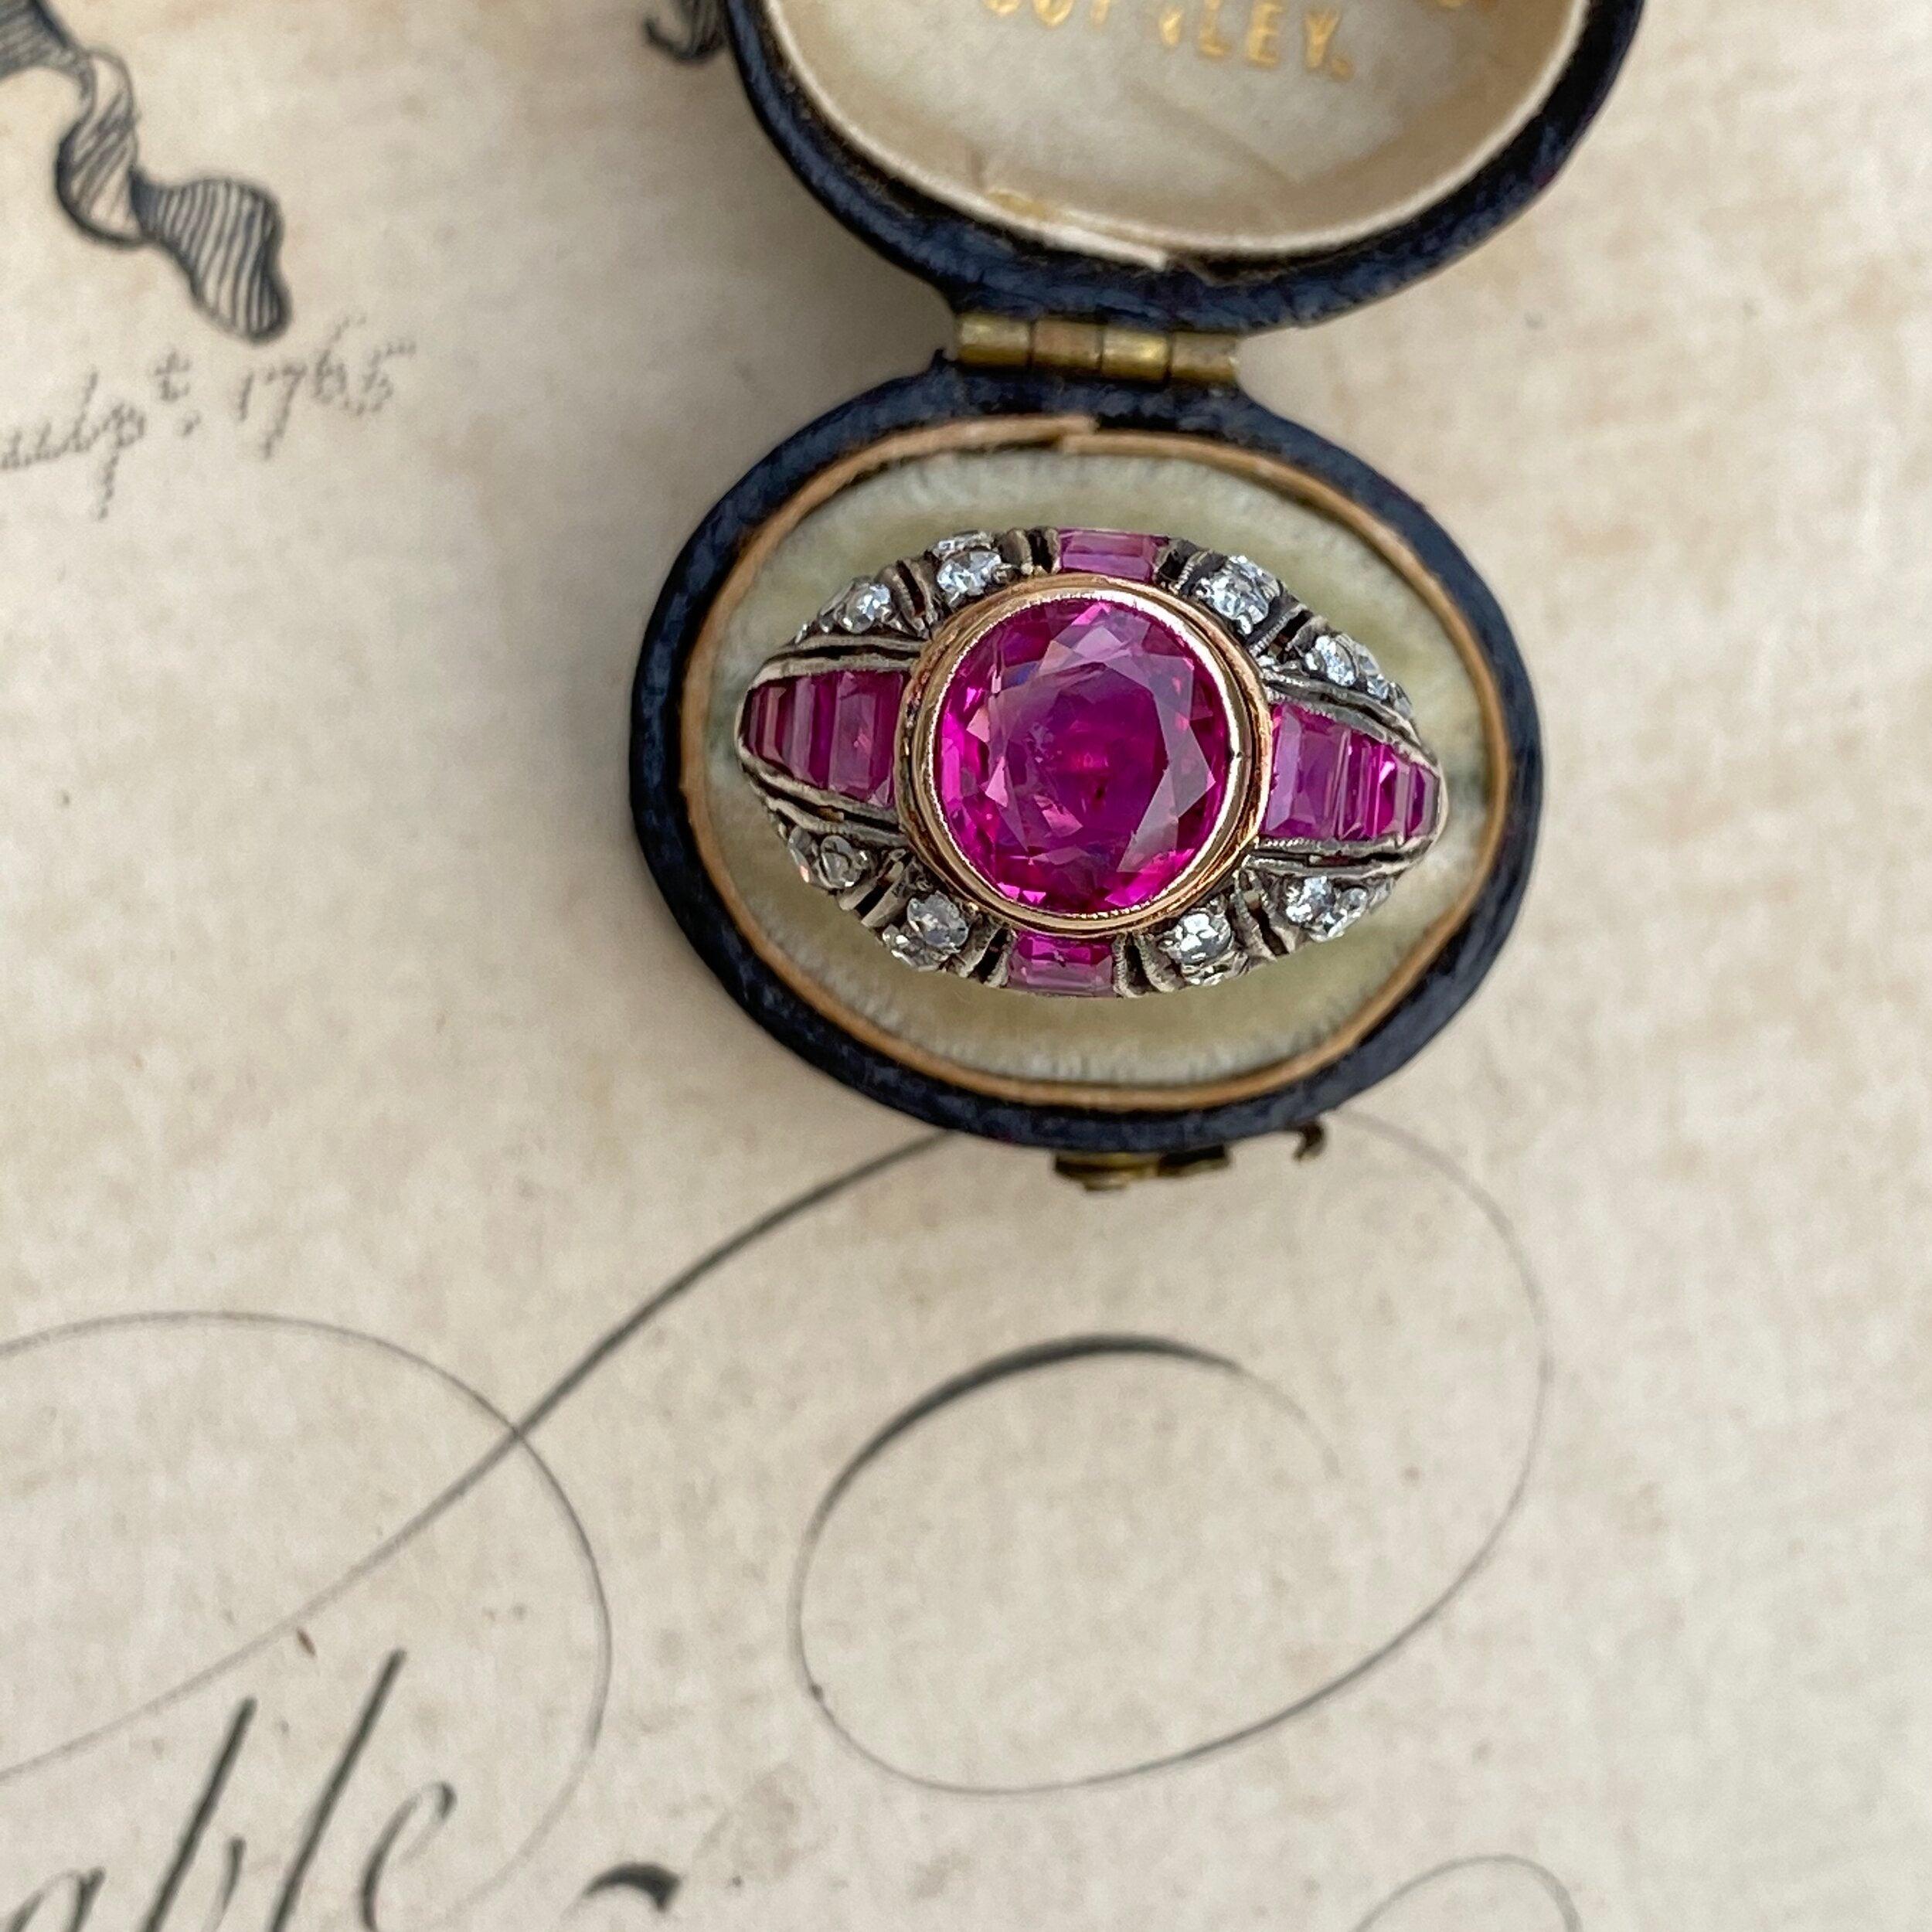 Crowned with a crystalline magenta red ruby, this lovely Edwardian bombe style ring boasts four rows of richly saturated calibre rubies divided by twinkling single cut diamonds that taper down the gently domed setting. Expertly fabricated in 14k